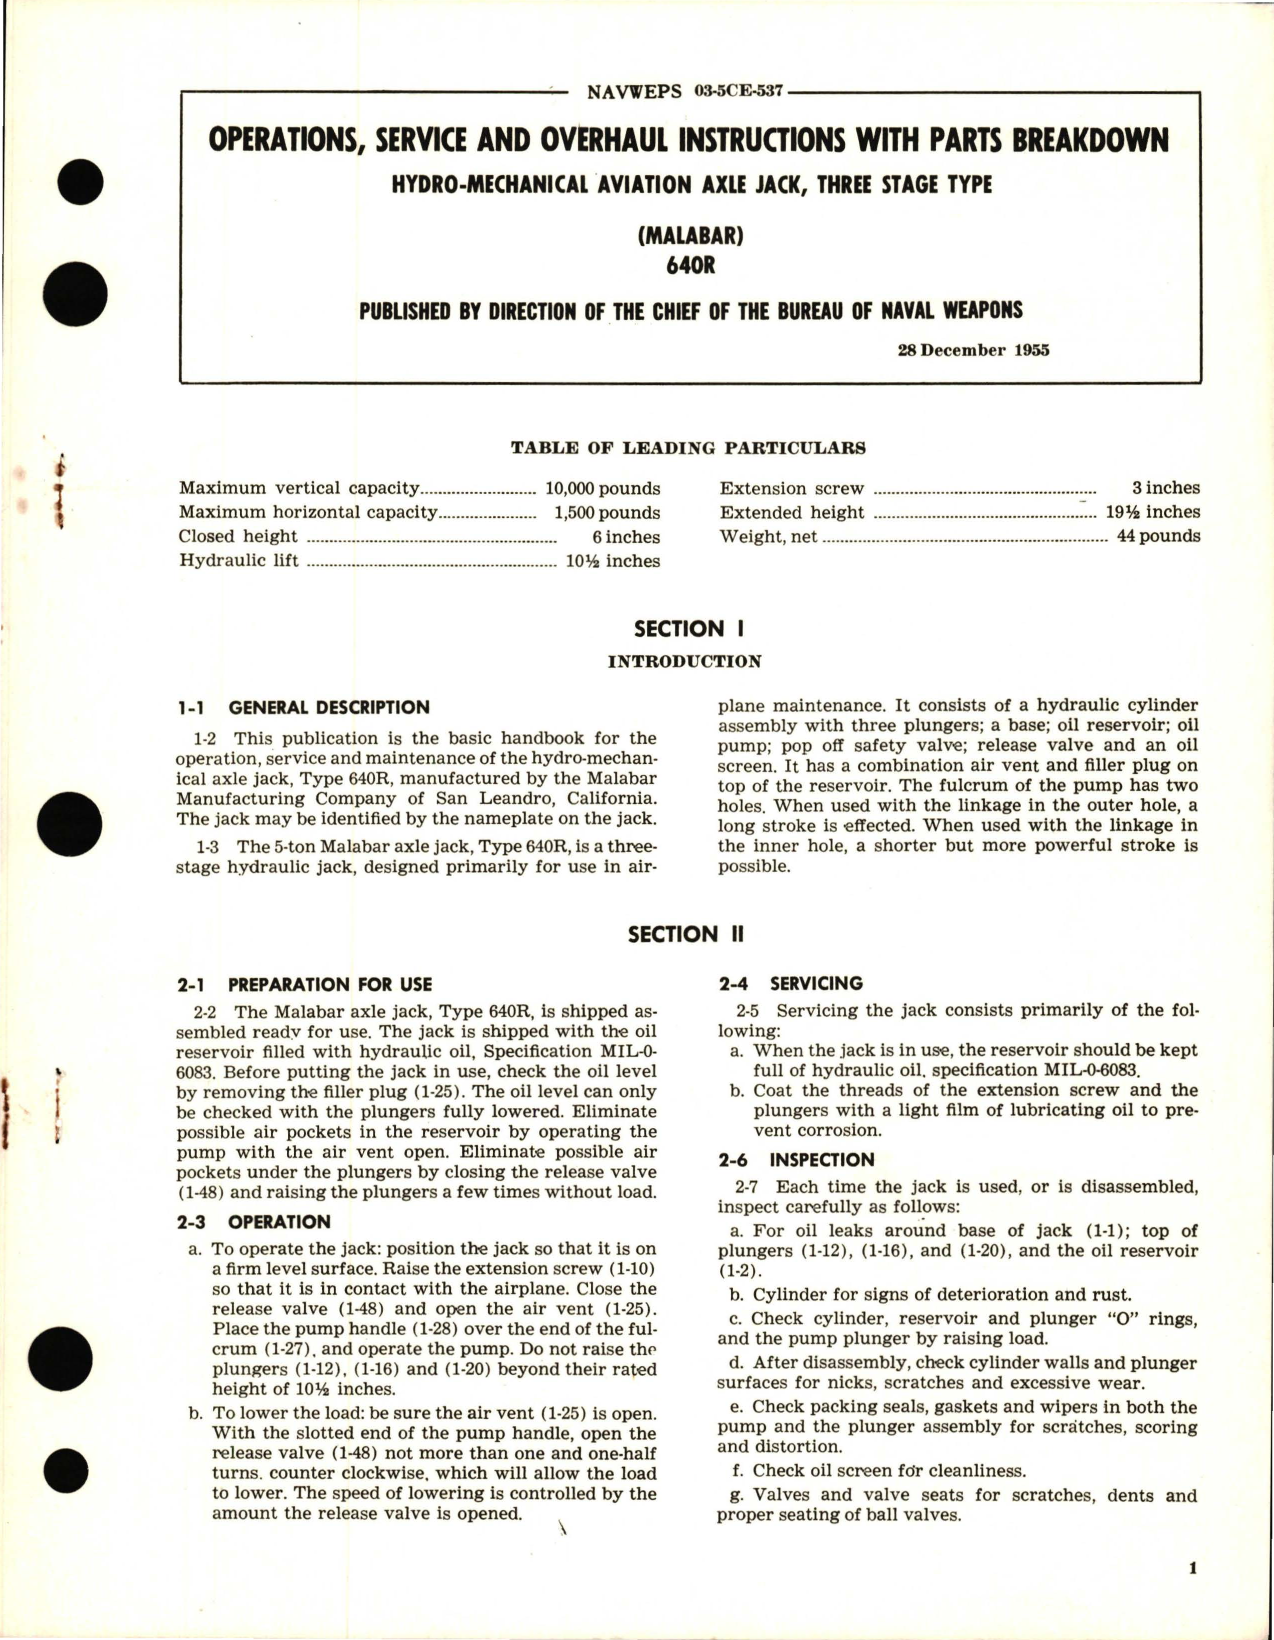 Sample page 1 from AirCorps Library document: Operations, Service and Overhaul Instructions with Parts Breakdown for Hydro Mechanical Aviation Axle Jack, Three Stage Type 640R